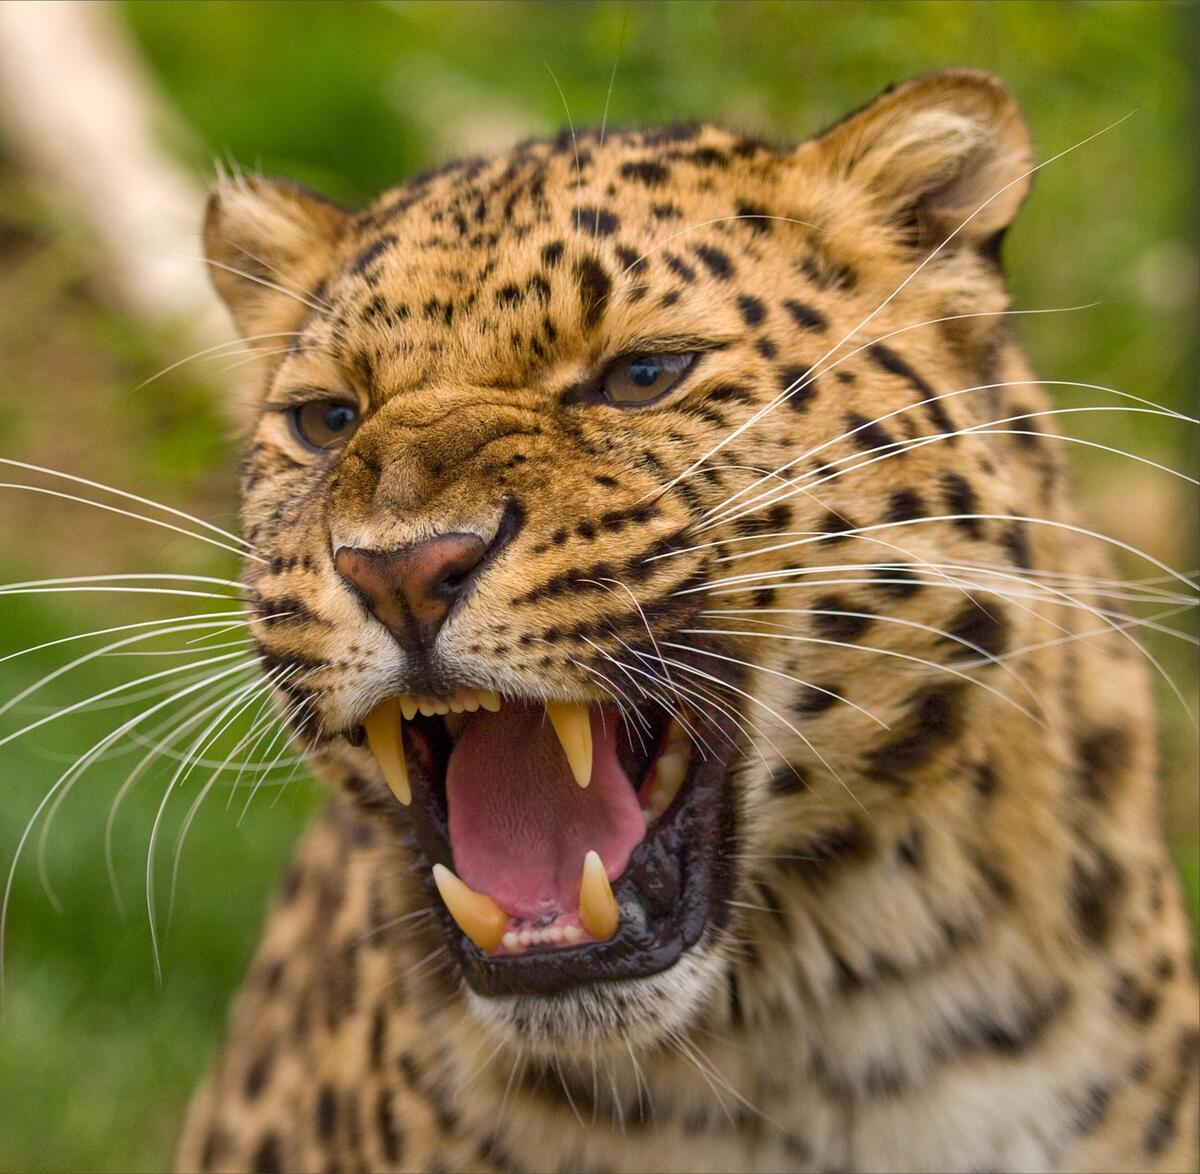 The teeth of the leopard hisses!